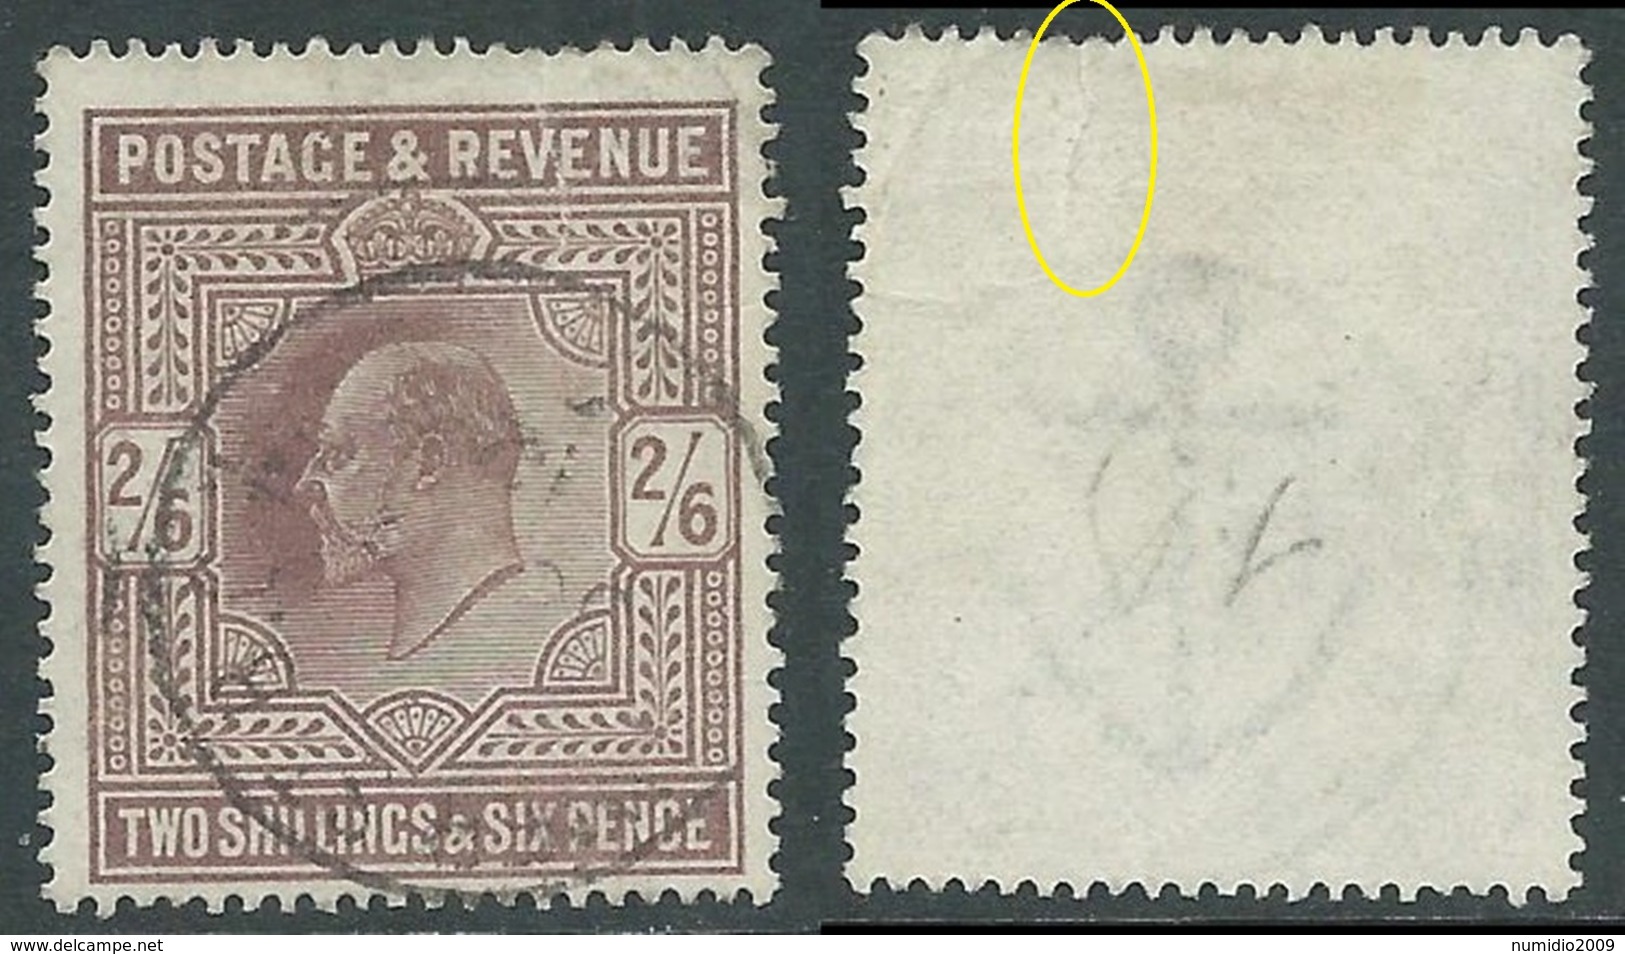 1902-10 GREAT BRITAIN USED SG 260 2s6d LILAC DEFECTIVE RIP - F21-9 - Usados